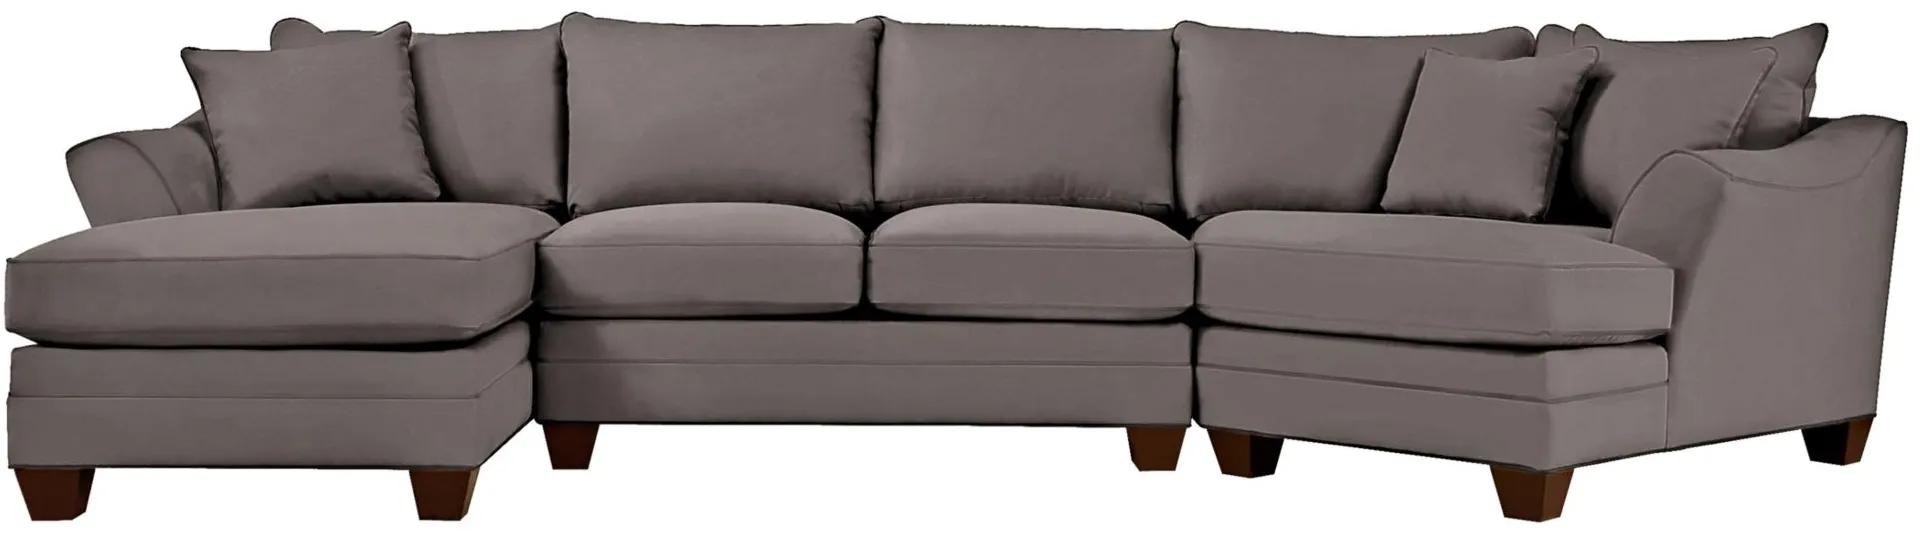 Foresthill 3-pc. Left Hand Facing Sectional Sofa in Suede So Soft Slate by H.M. Richards